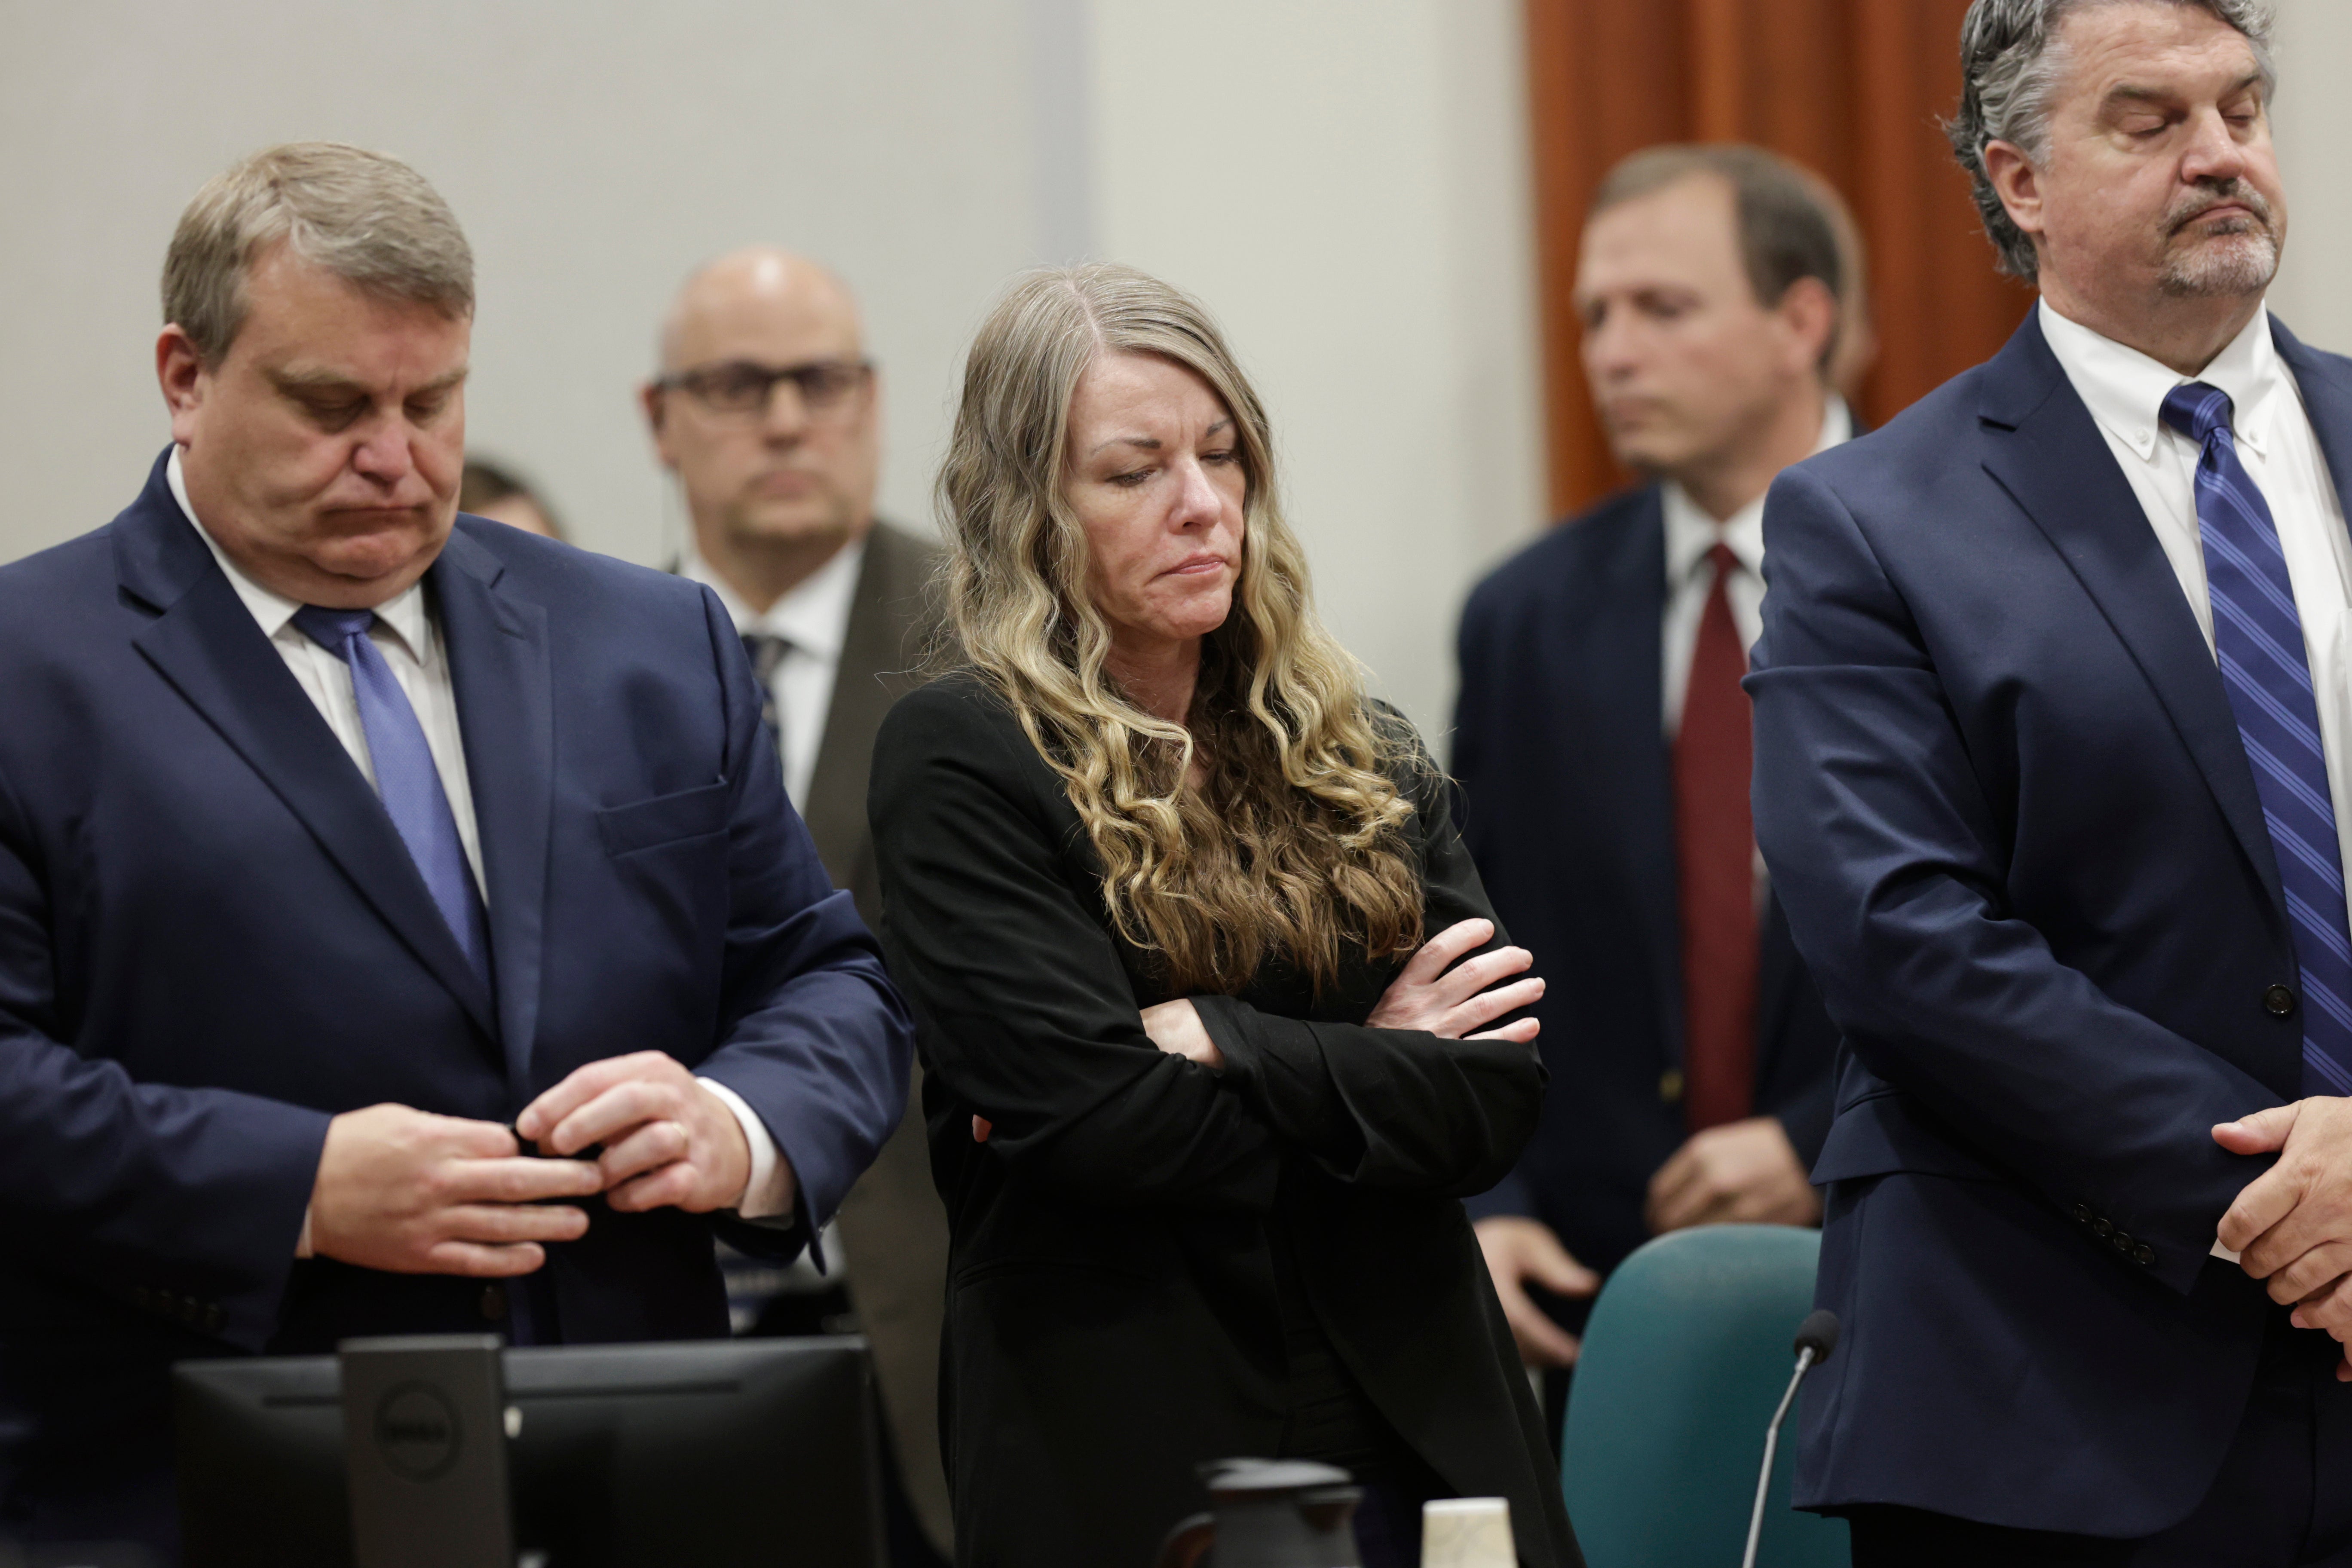 Last year, Lori Vallow was convicted of the three murders and sentenced to life in prison